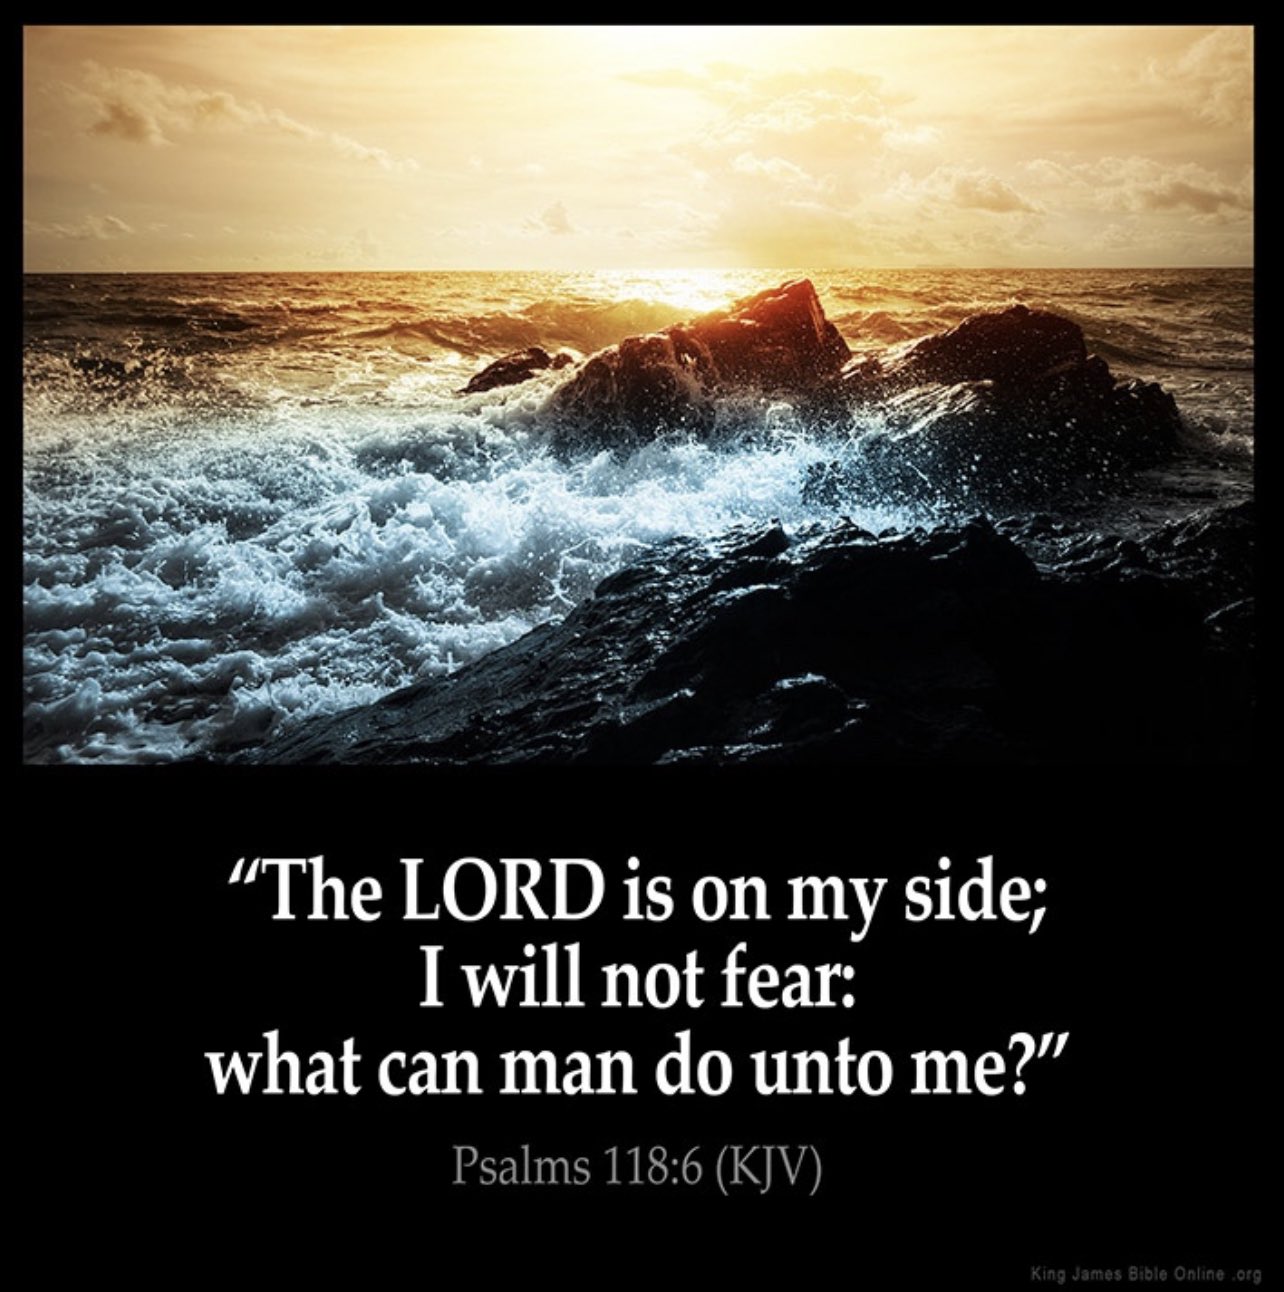 "The LORD is 0n my side; Iwill not fear: what can man do unto Psalms 118.6 (KJV) ina Jantea Arele OalinaKara me?"